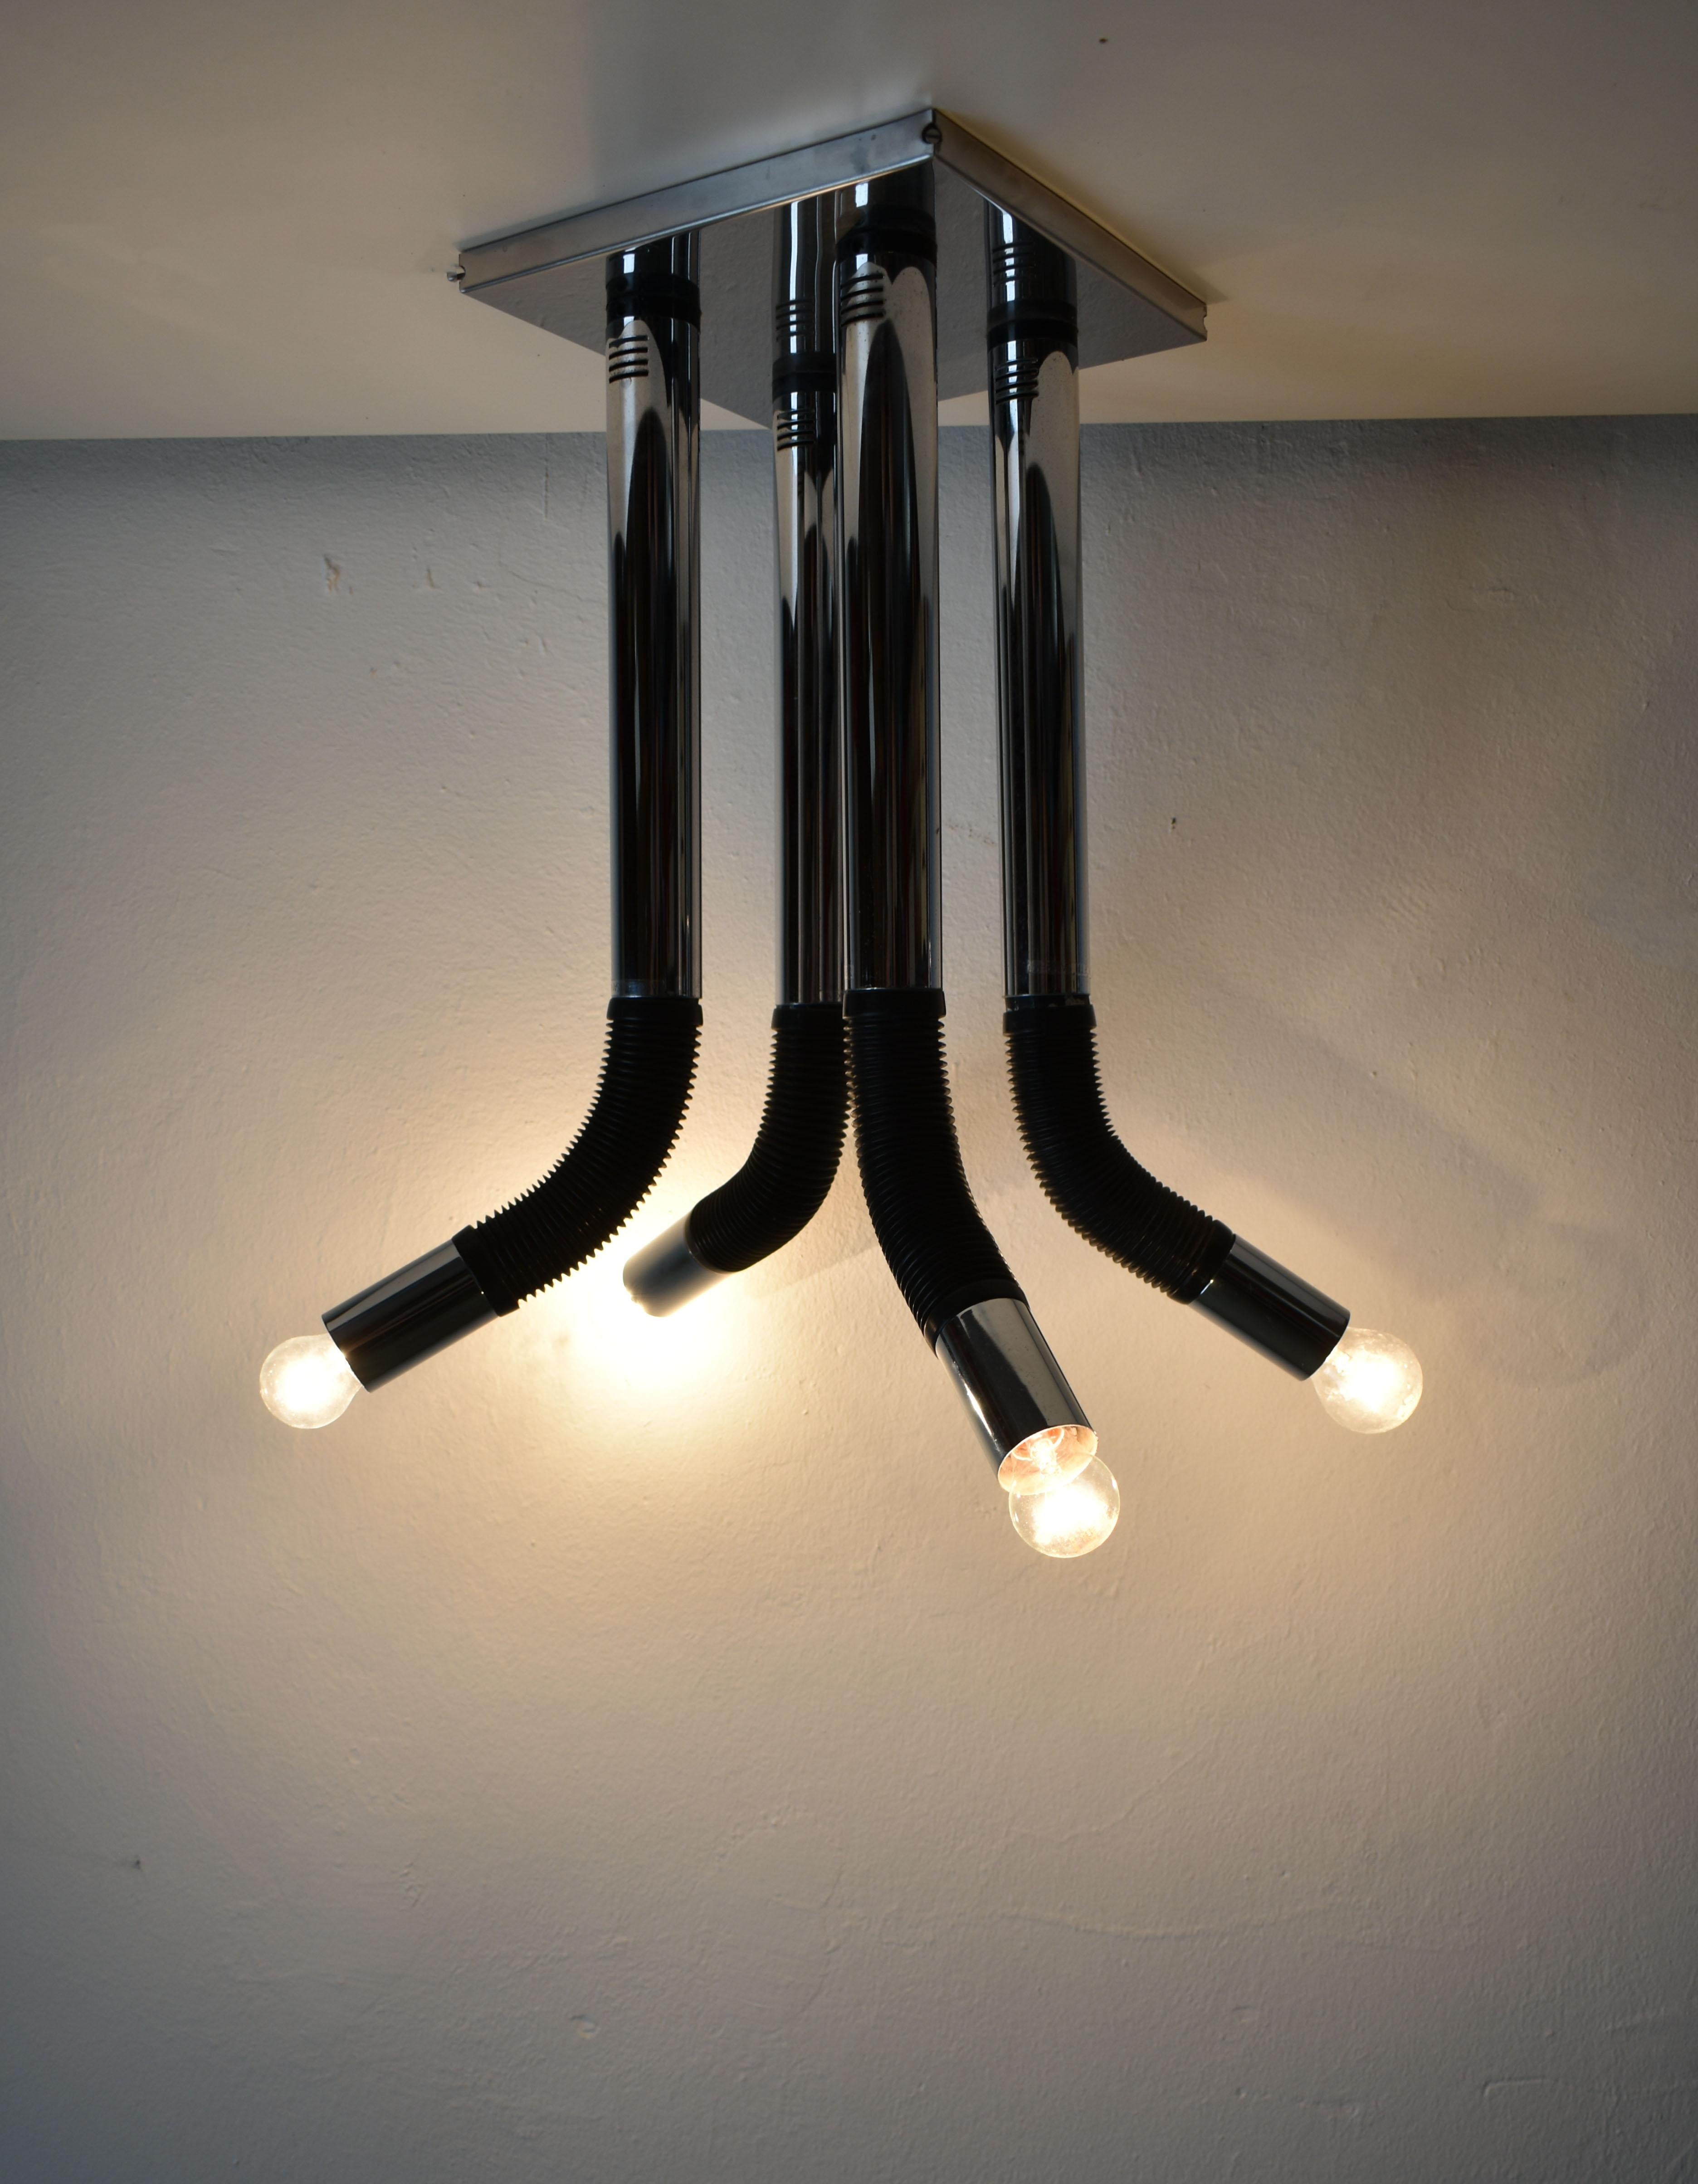 Vintage chandelier with 4 lights, model 'Elbow' designed by Mario Bellini for Italian company Targetti Sankey

Produced in the 1970s and 1980s

Model 'Elbow' was produced in few versions, like a desk lamp, clamp lamp, floor lamp and so on. The